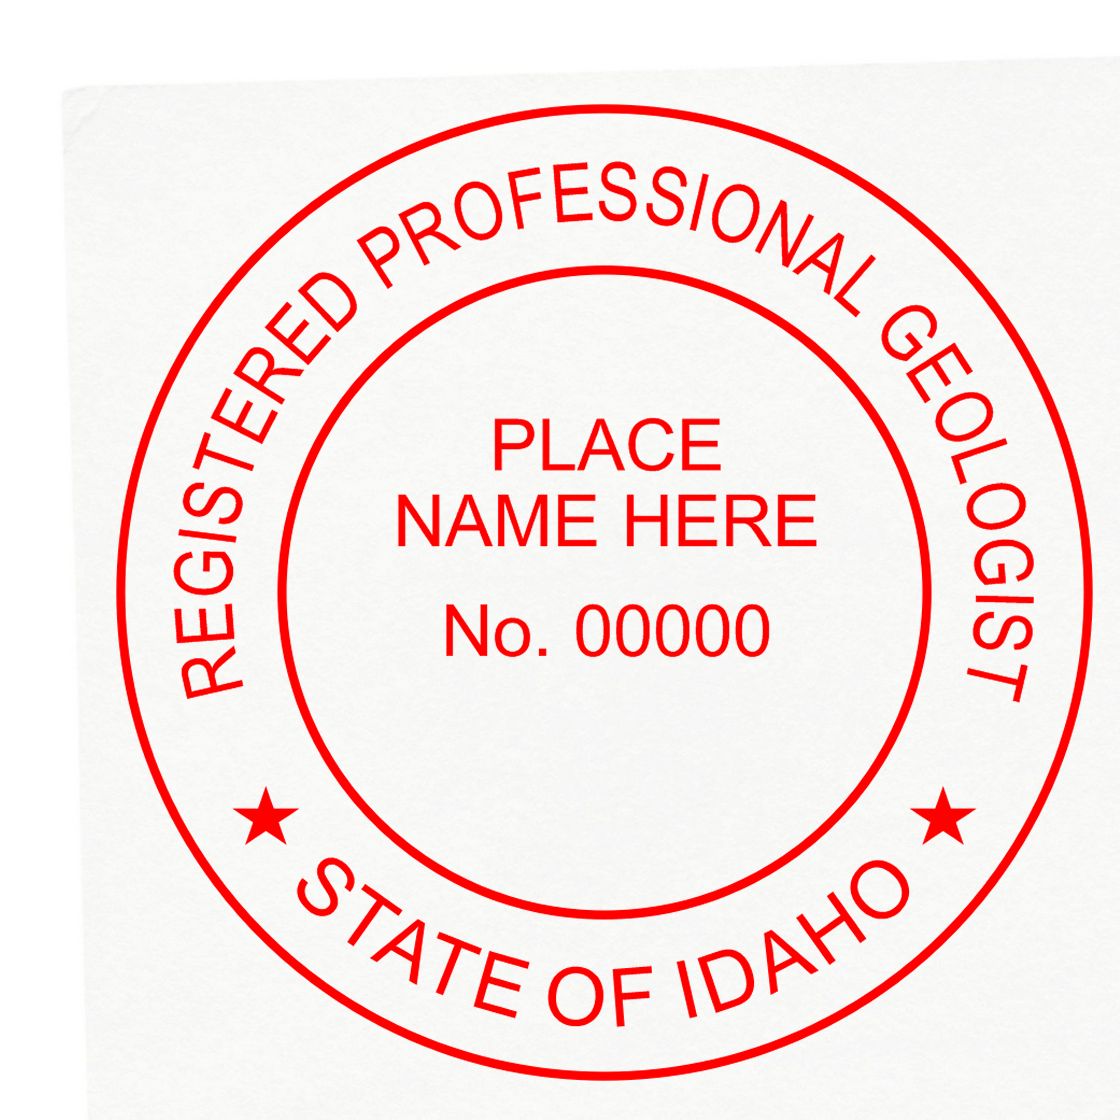 Another Example of a stamped impression of the Self-Inking Idaho Geologist Stamp on a office form